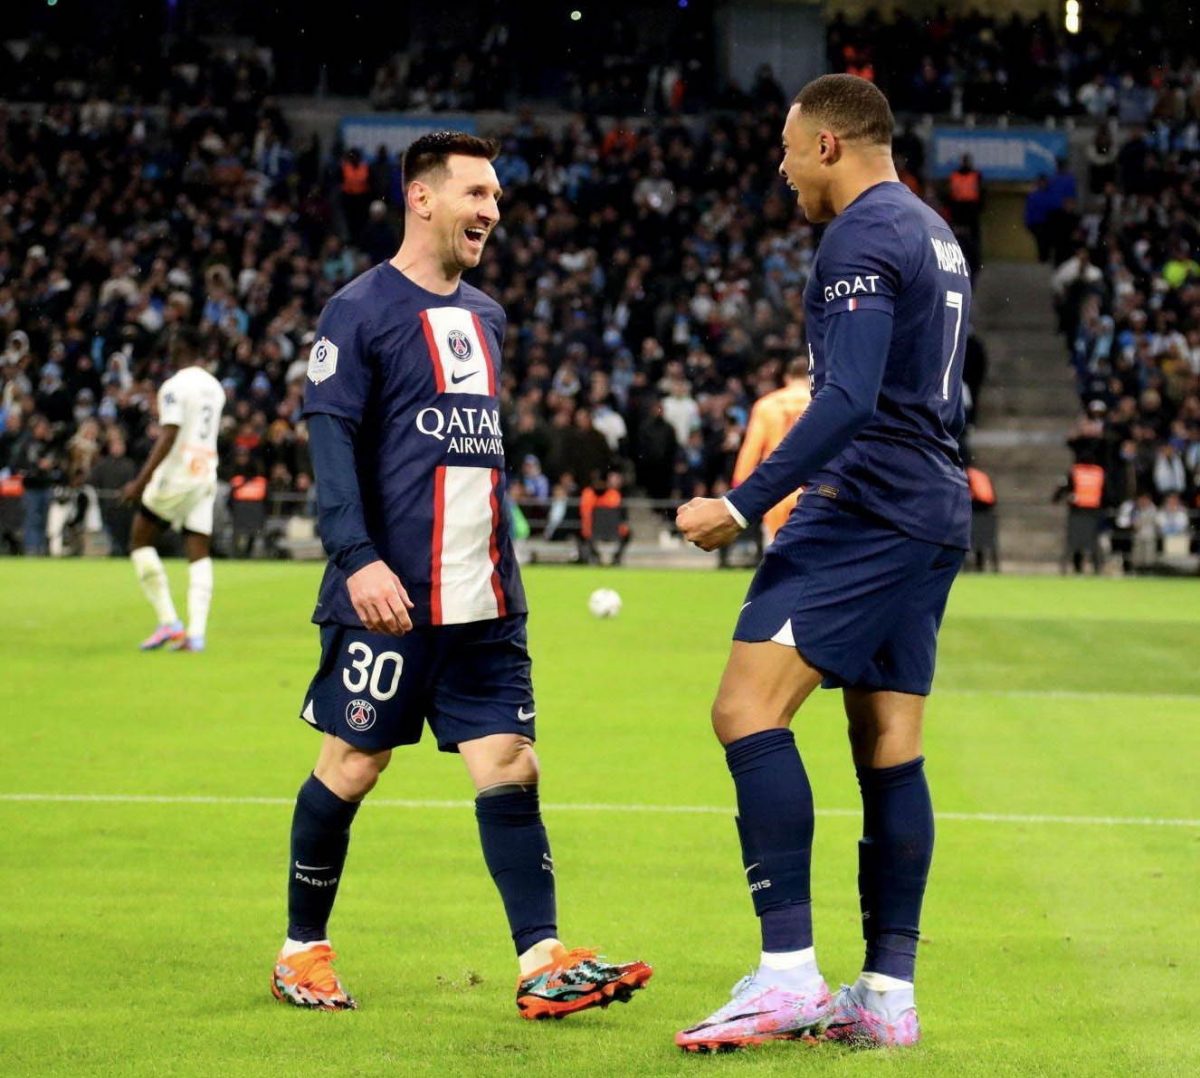 World Cup foes Lionel Messi, left and Kylian Mbappe united to help Paris St Germain defeat Olympique de Marseille yesterday. (Photo courtesy Twitter)